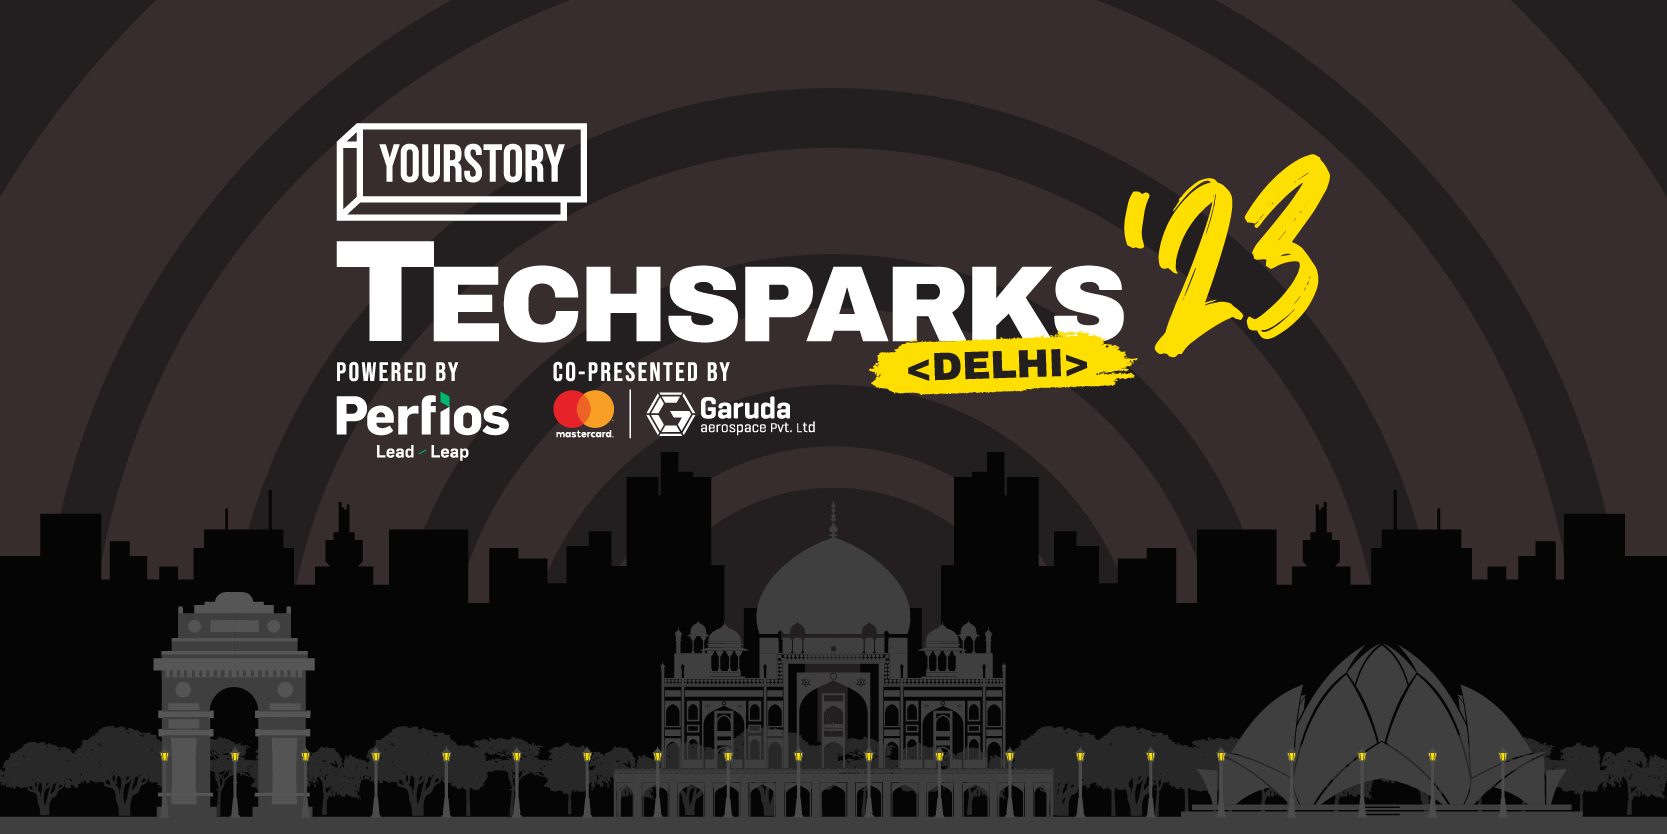 TechSparks 2023 Delhi ends with a bang